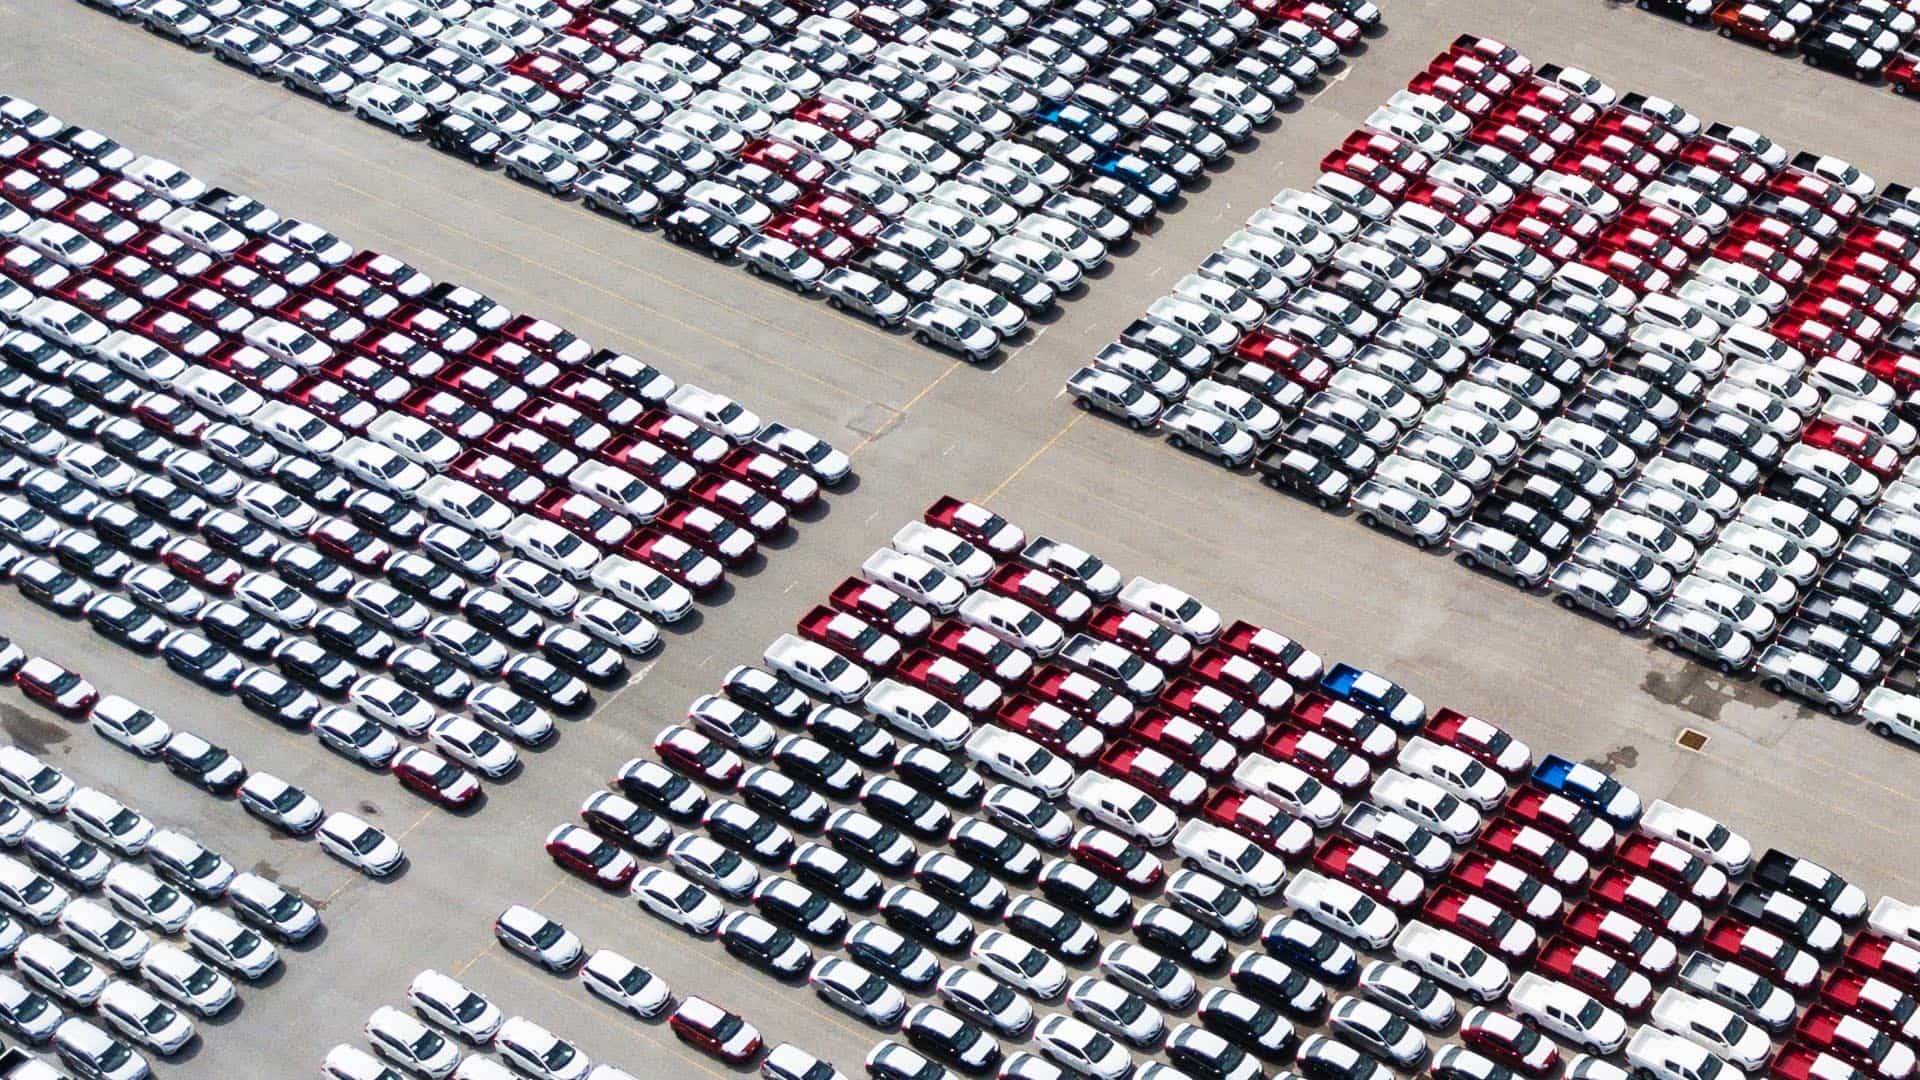 Managing the automotive supply chain